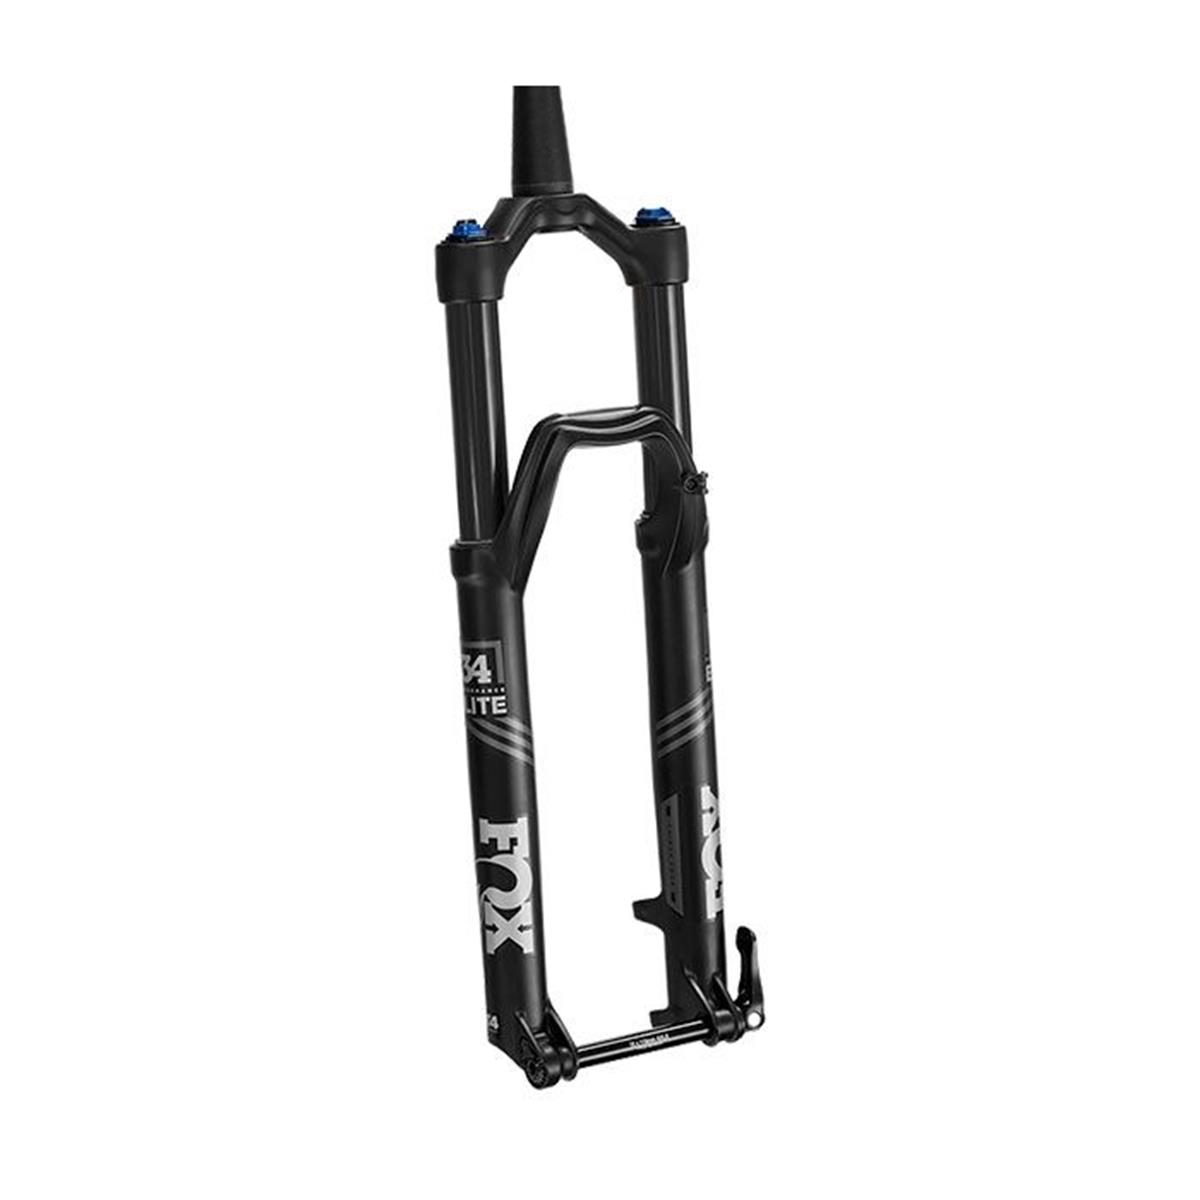 Fox Racing Shox Suspension Fork 34 Float Performance Elite 2019, 27,5 Inch, 15 x 110 mm, FIT4